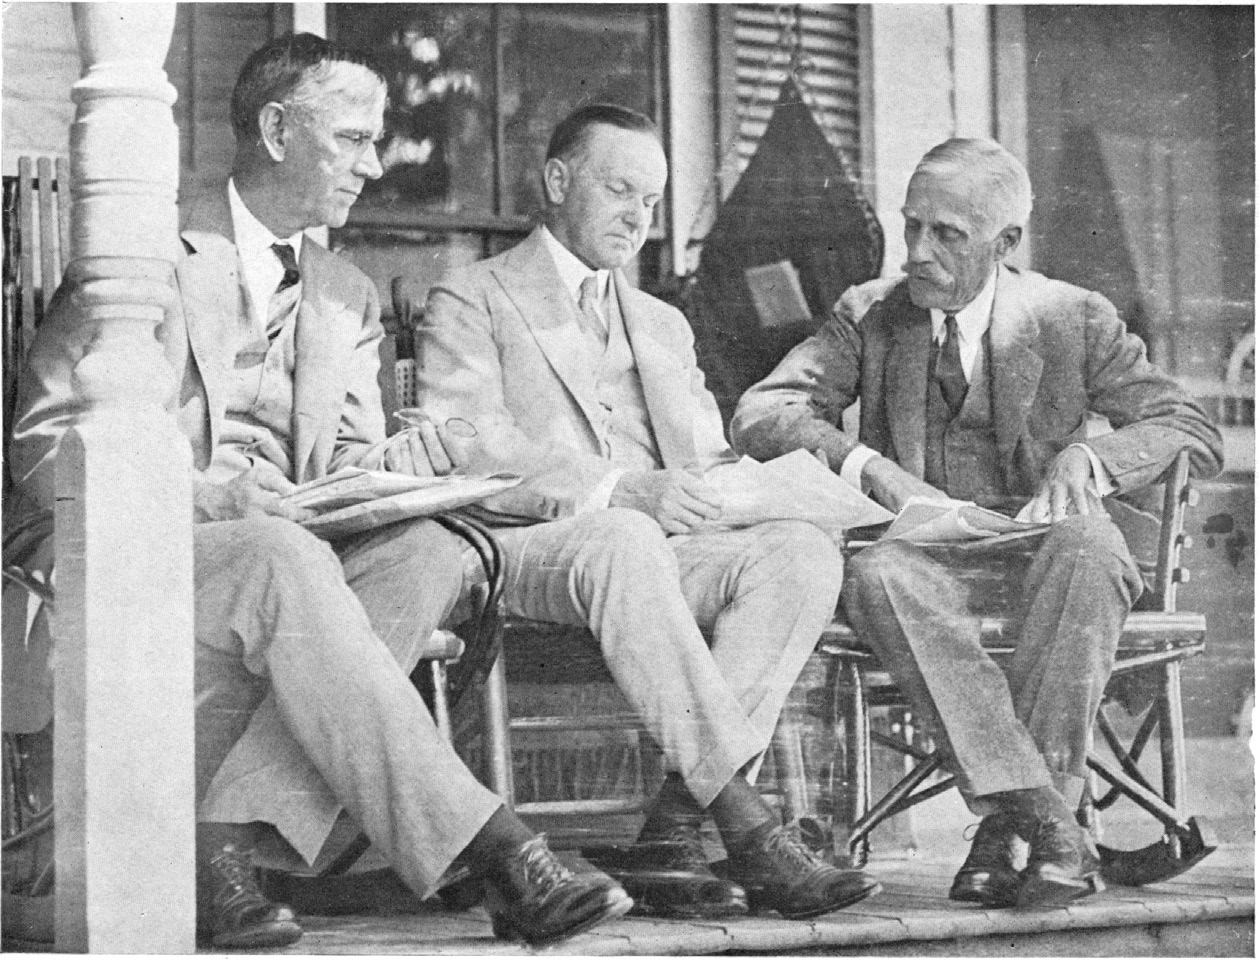 Senator Smoot (right) with President Calvin Coolidge (center). After a rocky start in his senatorial career, Reed Smoot became one of the most influential senators in Washington, DC. Reed Smoot Papers, L. Tom Perry Special Collections, Harold B. Lee Library, Brigham Young University.